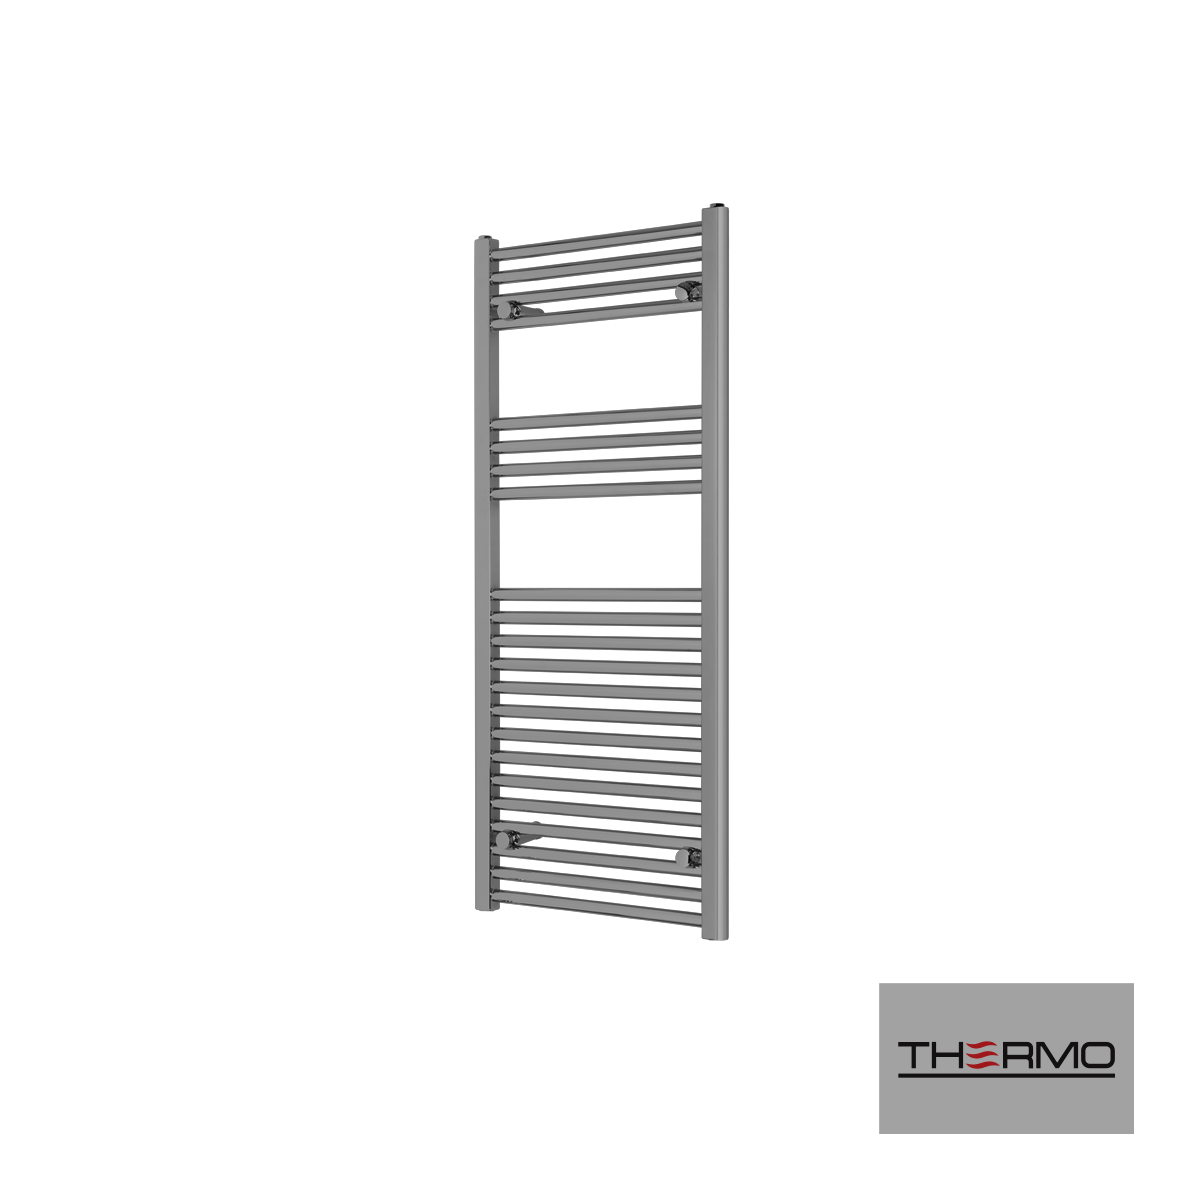 Heated towel rail ALTO 120x50 from MILD STEEL with hydraulic or